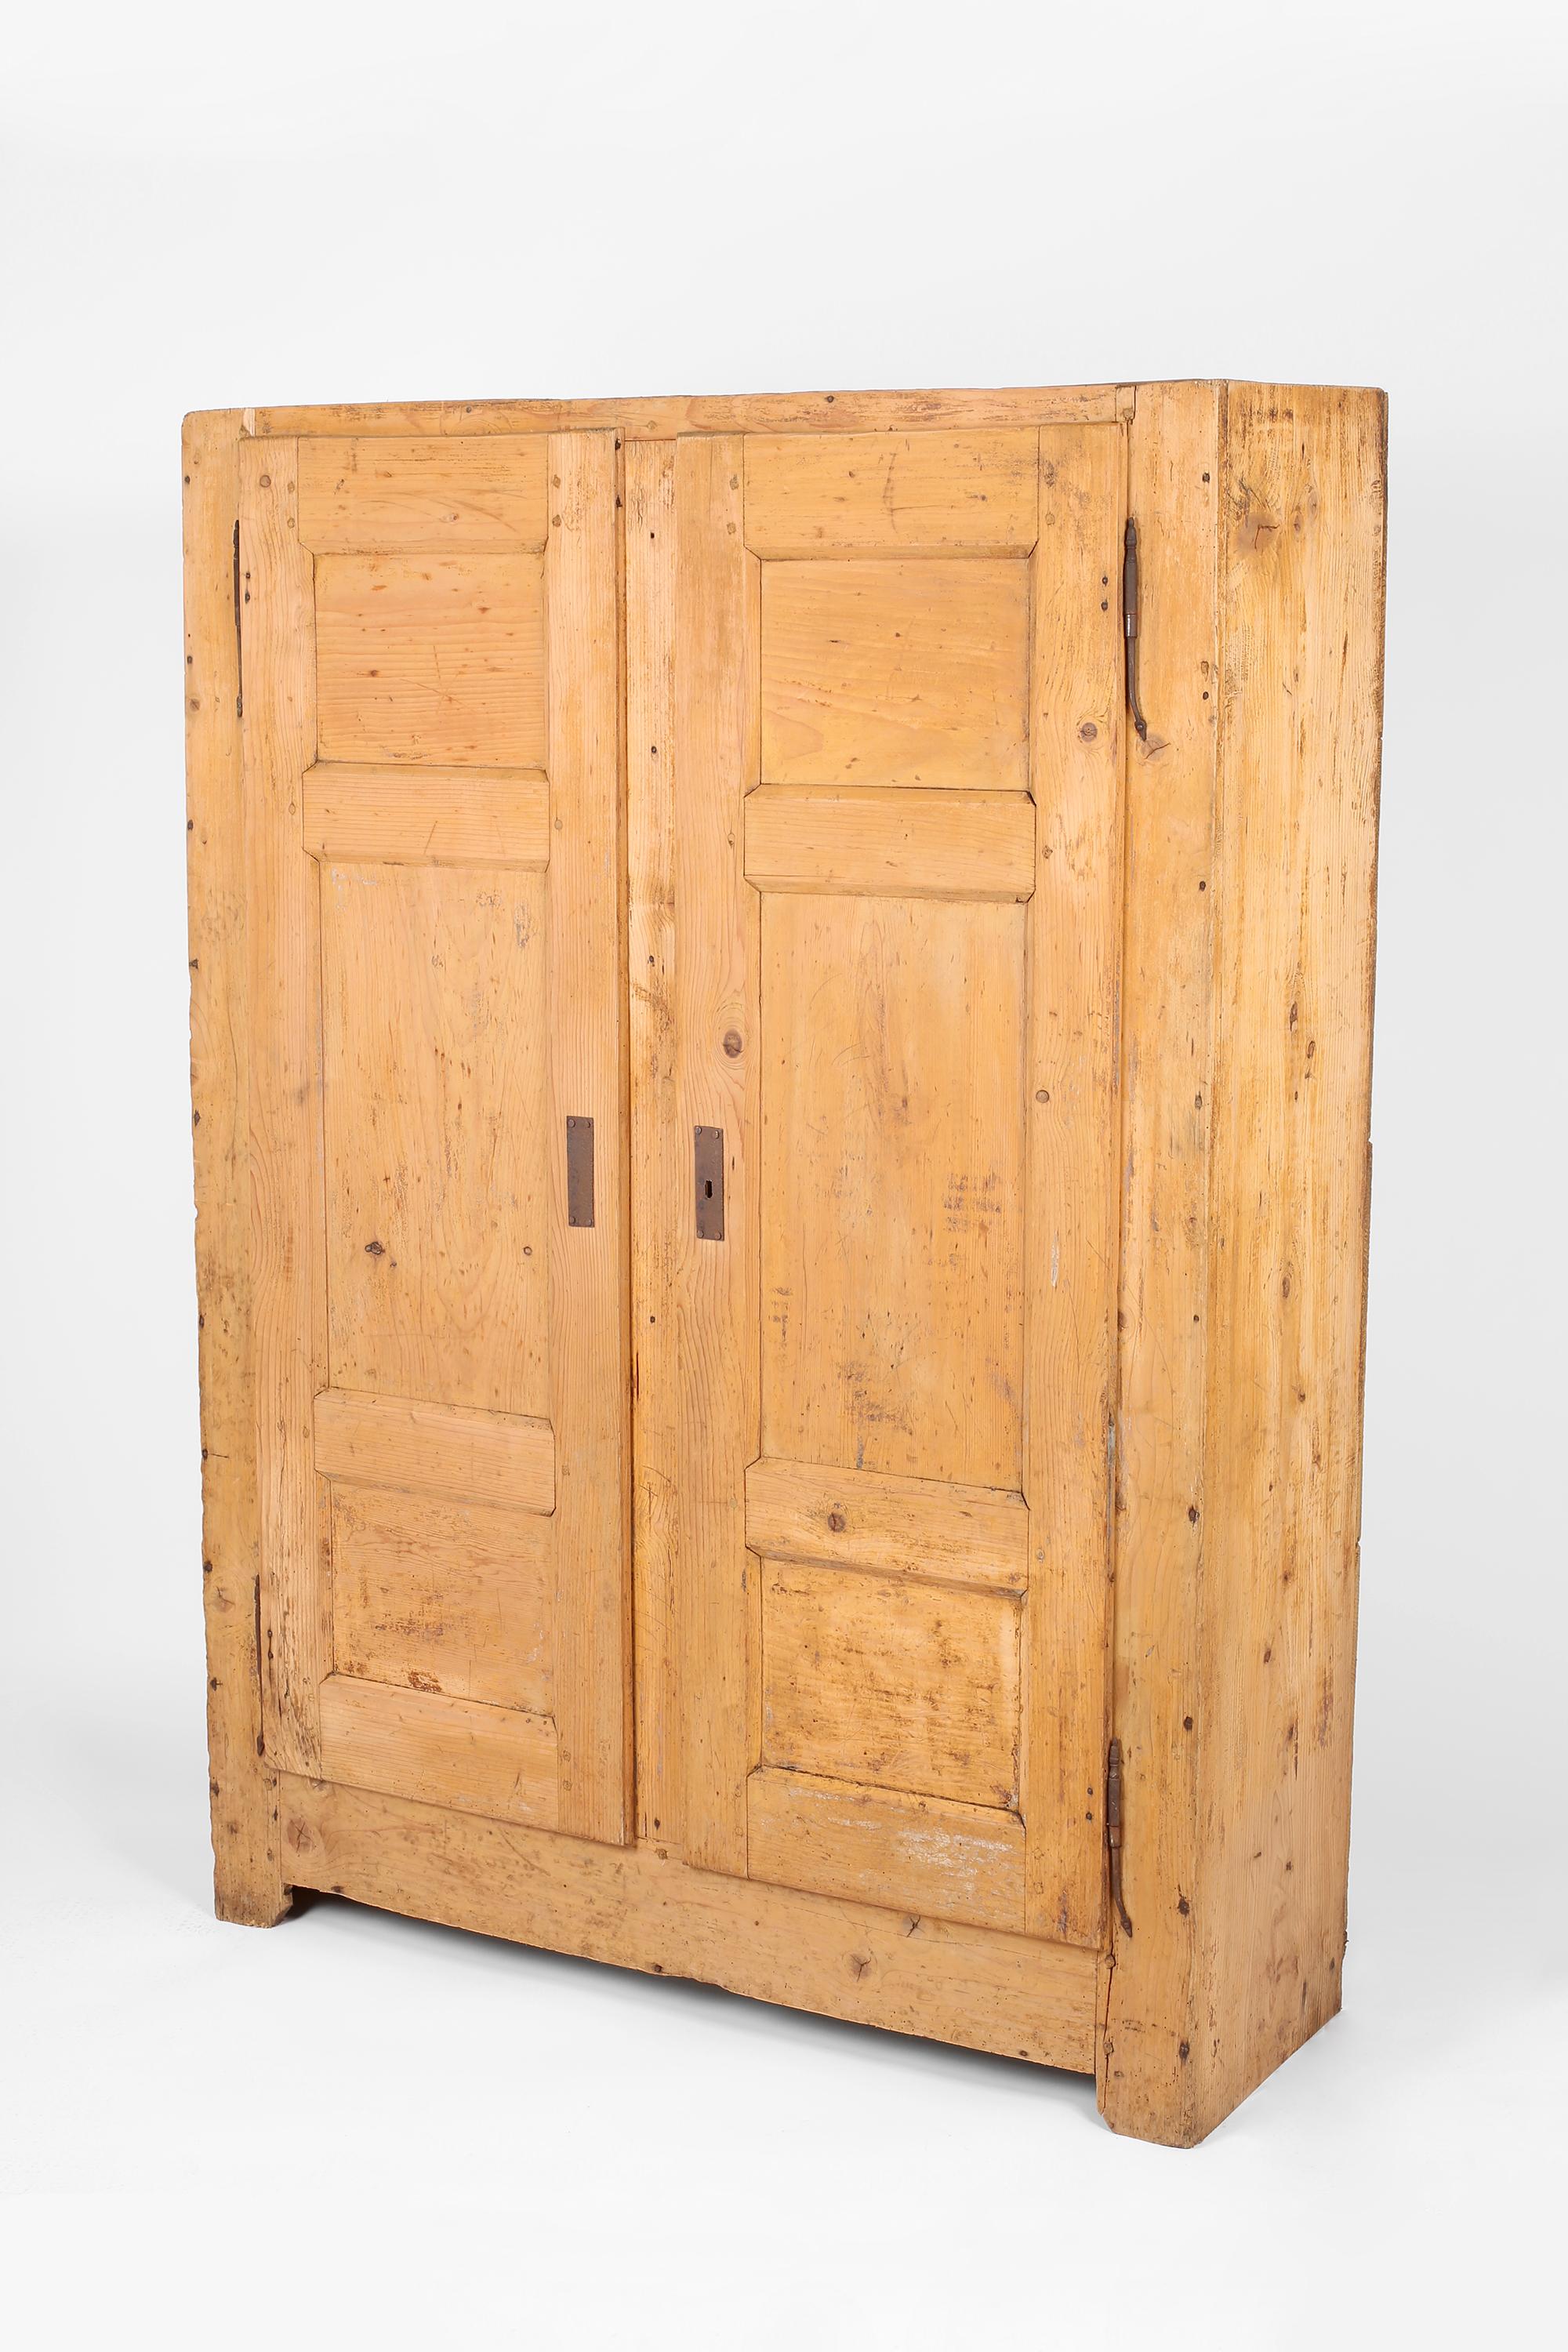 A beautifully patinated 19th century scrubbed pine cupboard from the alpine Haute-Savoie region. Pegged and nailed in construction, with decorative forged iron hinges and original lock with key. Two doors open to reveal a useful arrangement of fixed